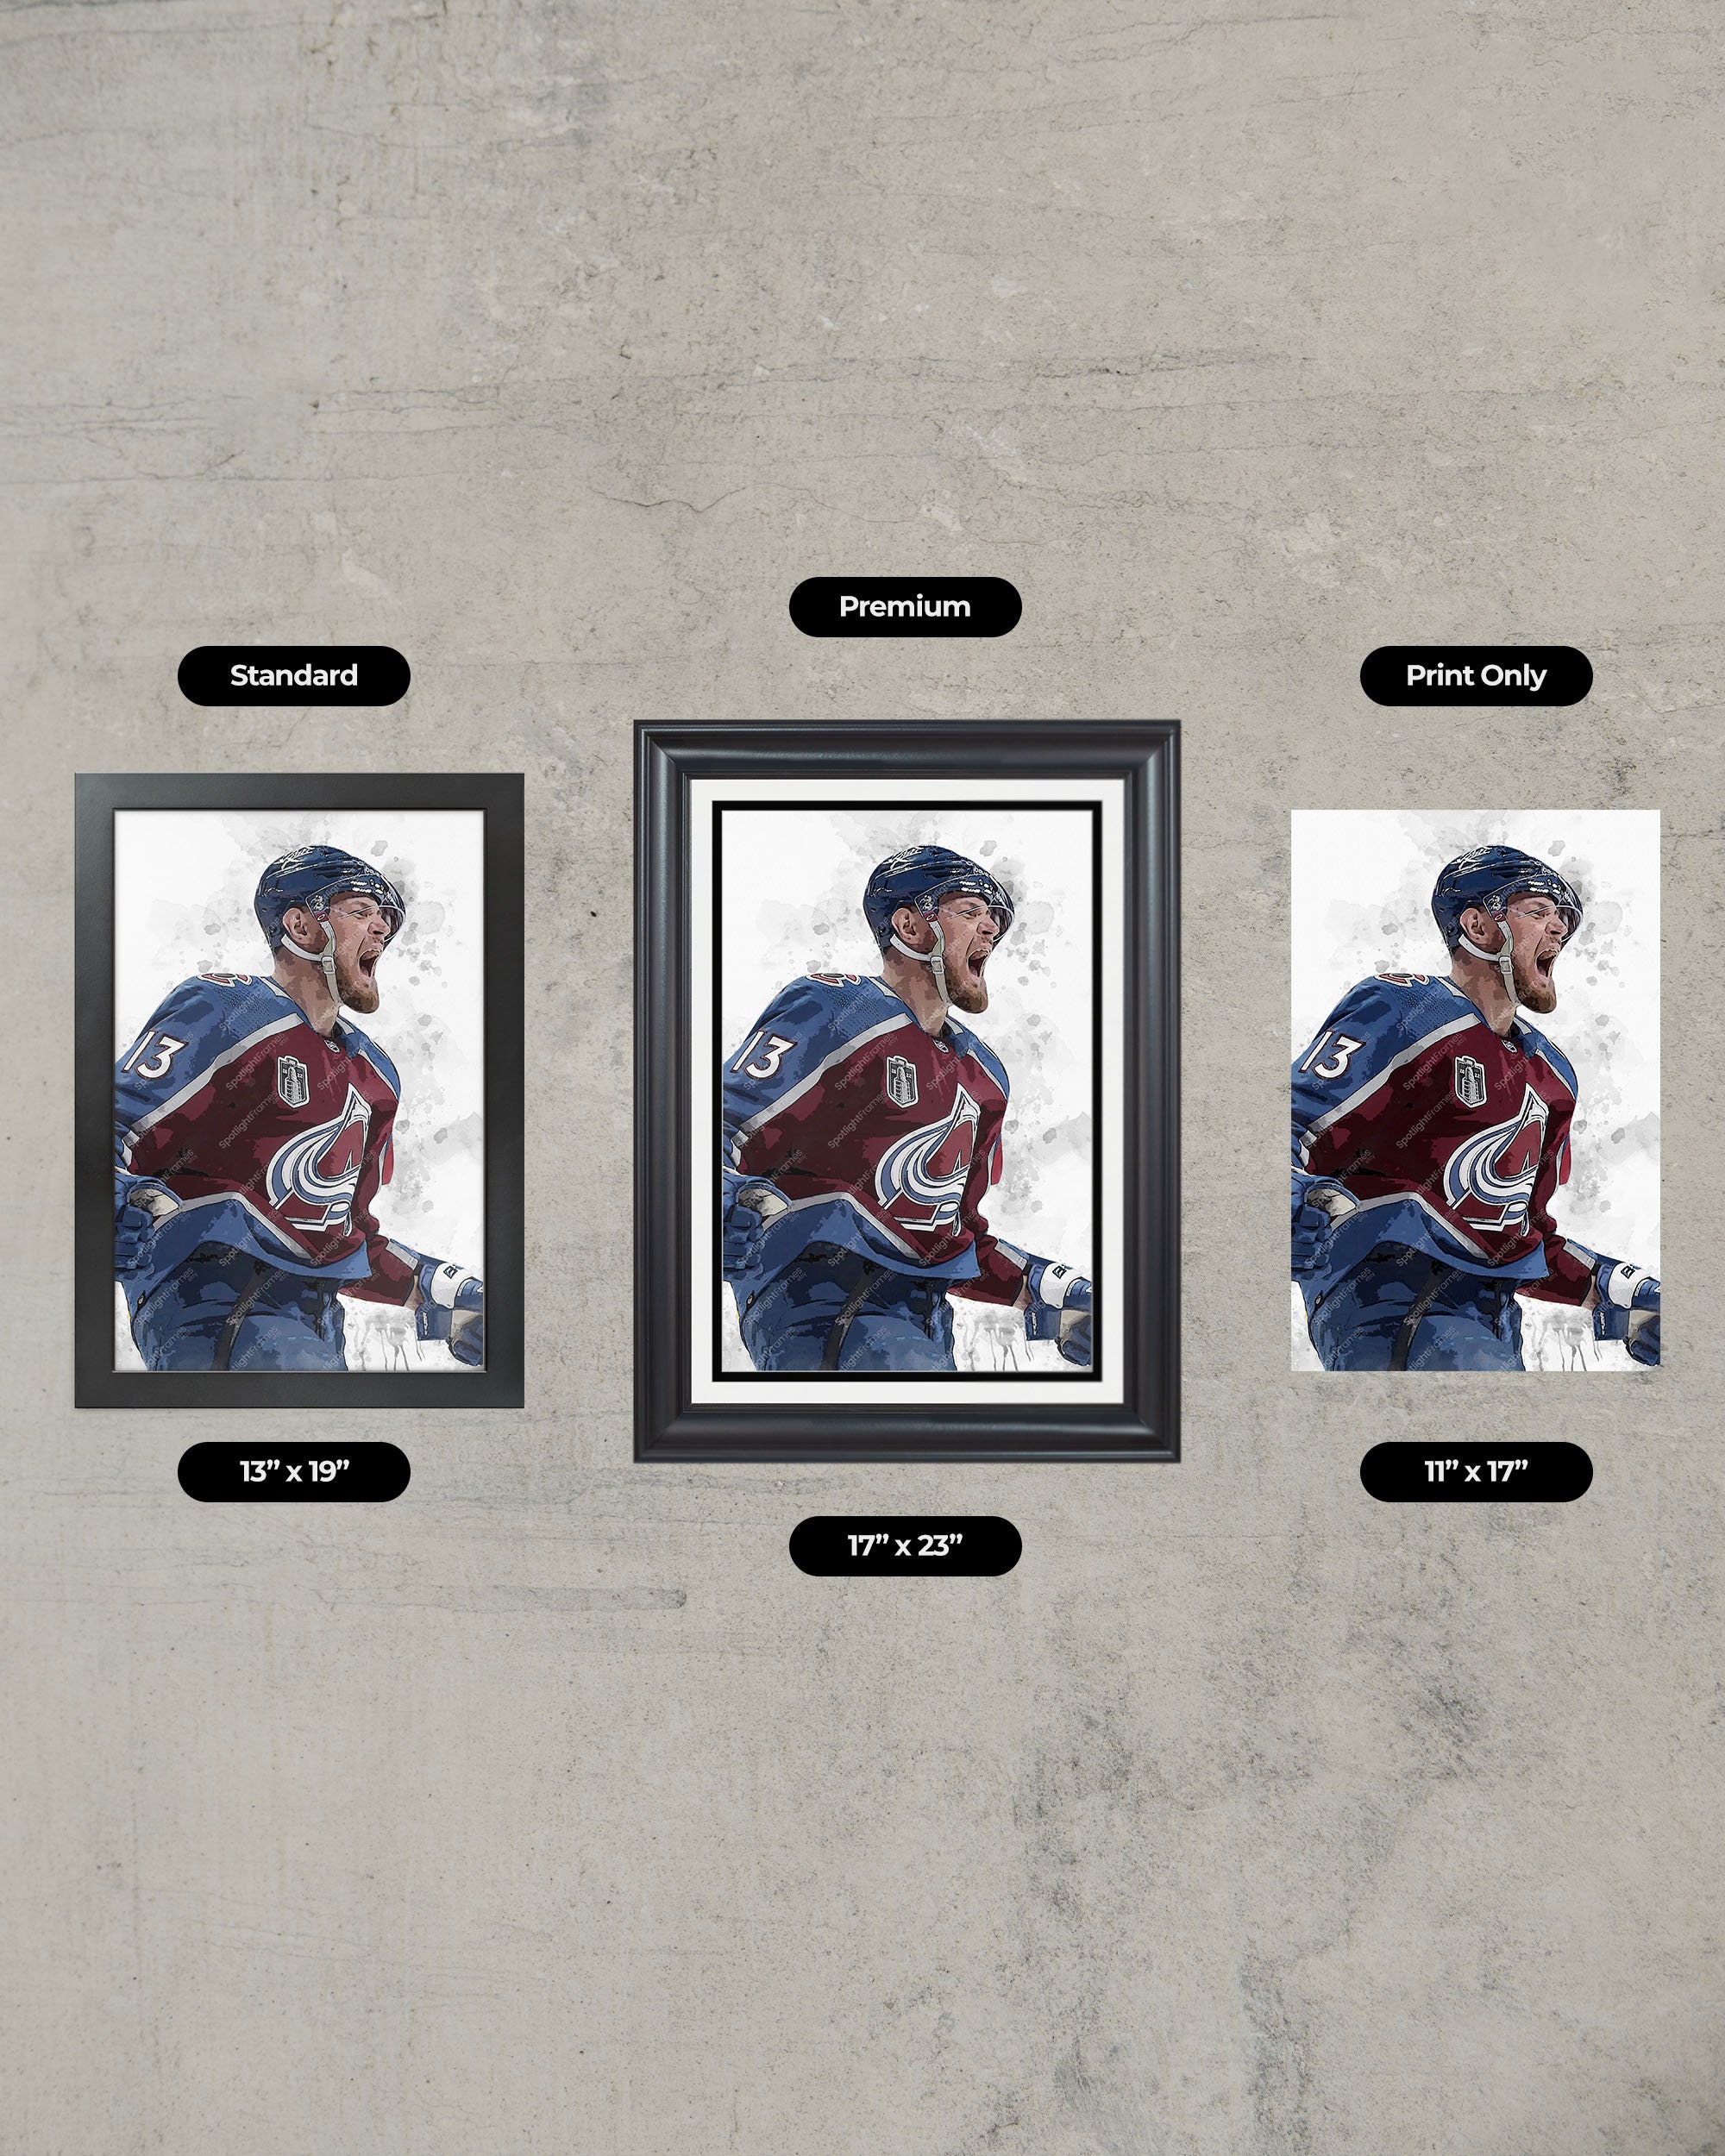 Cale Makar Posters for Sale